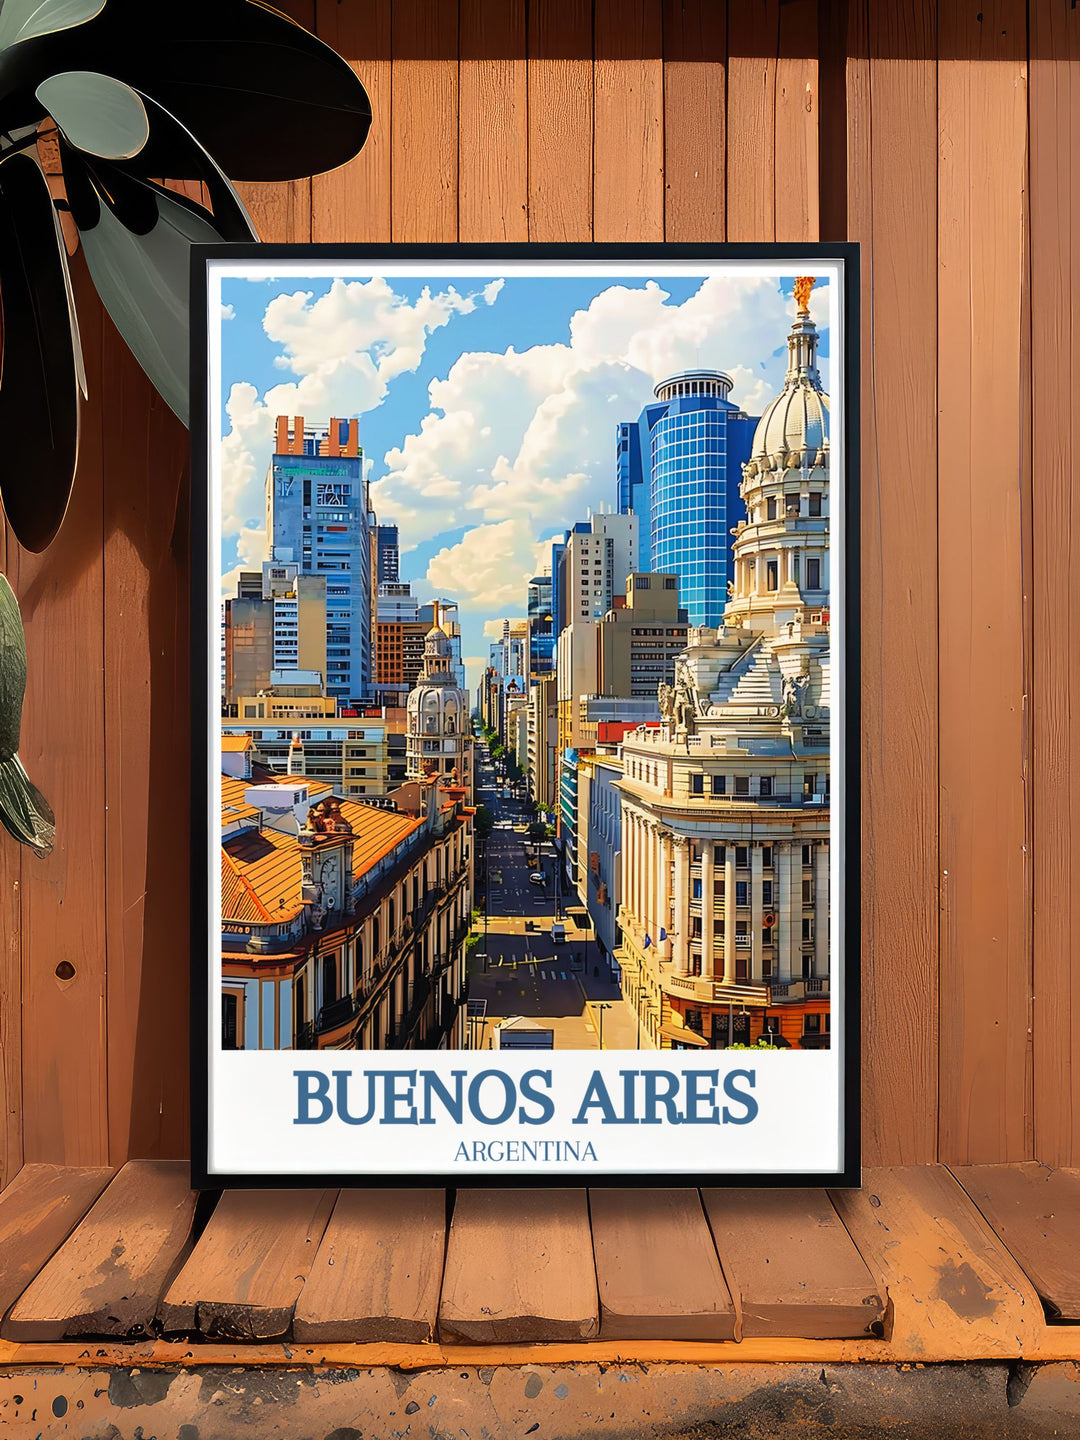 This travel poster captures the historic Plaza de Mayo in Buenos Aires and the majestic Casa Rosada, perfect for adding Argentinas rich cultural heritage to your decor.